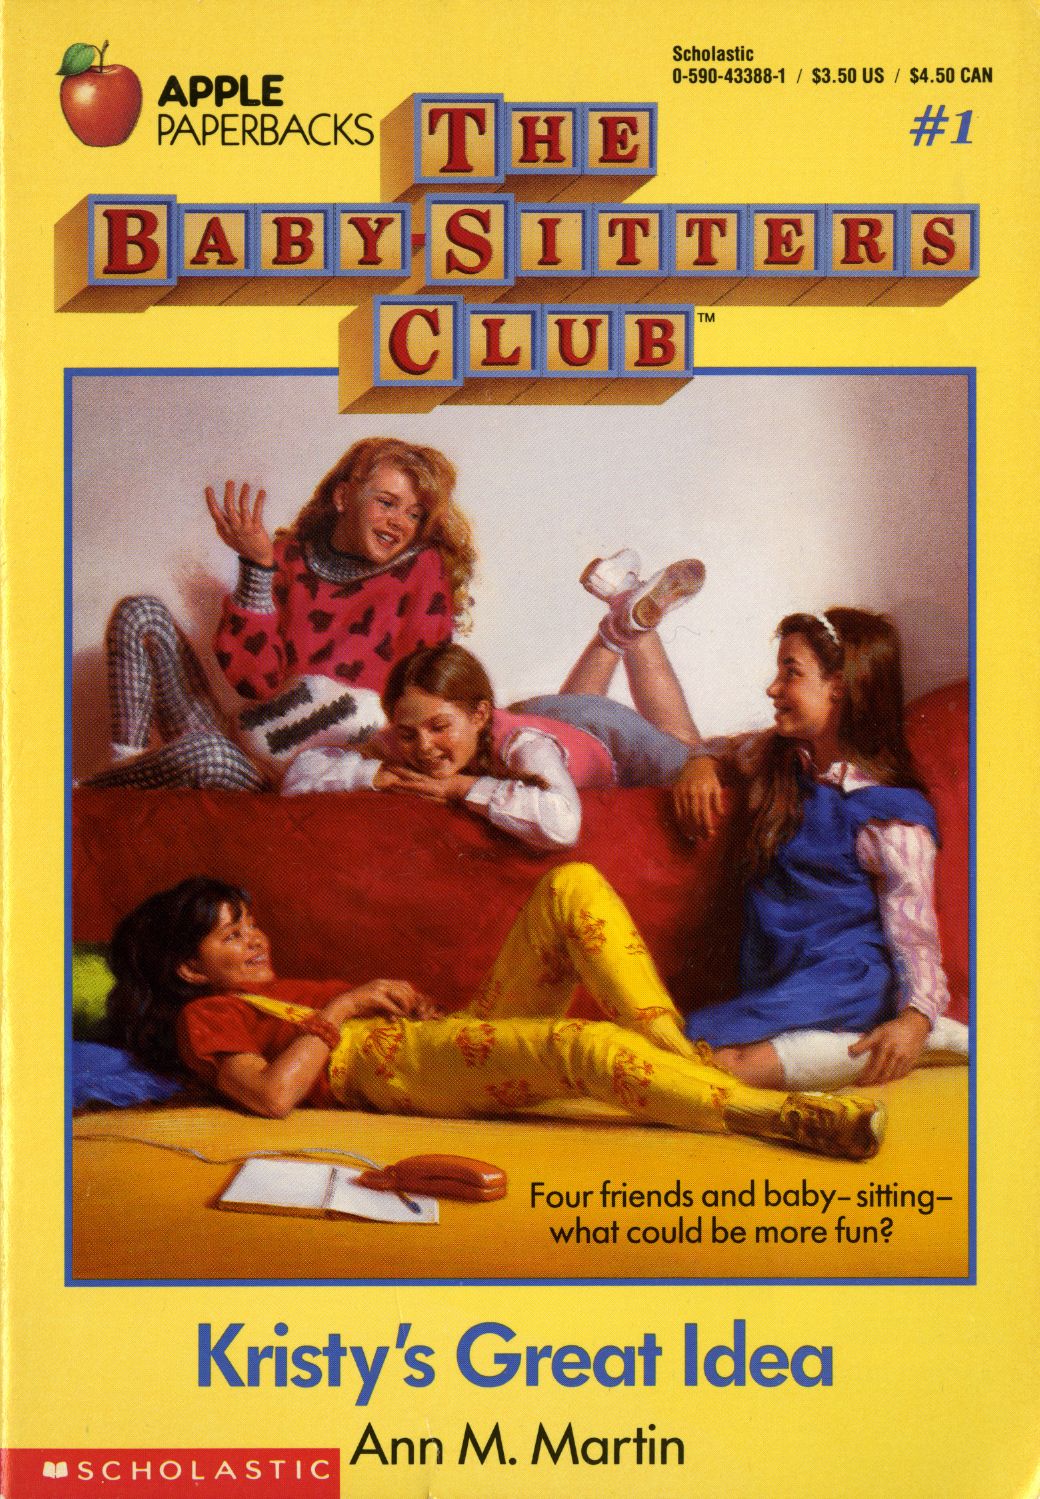 The Baby Sitters Club Netflix #2